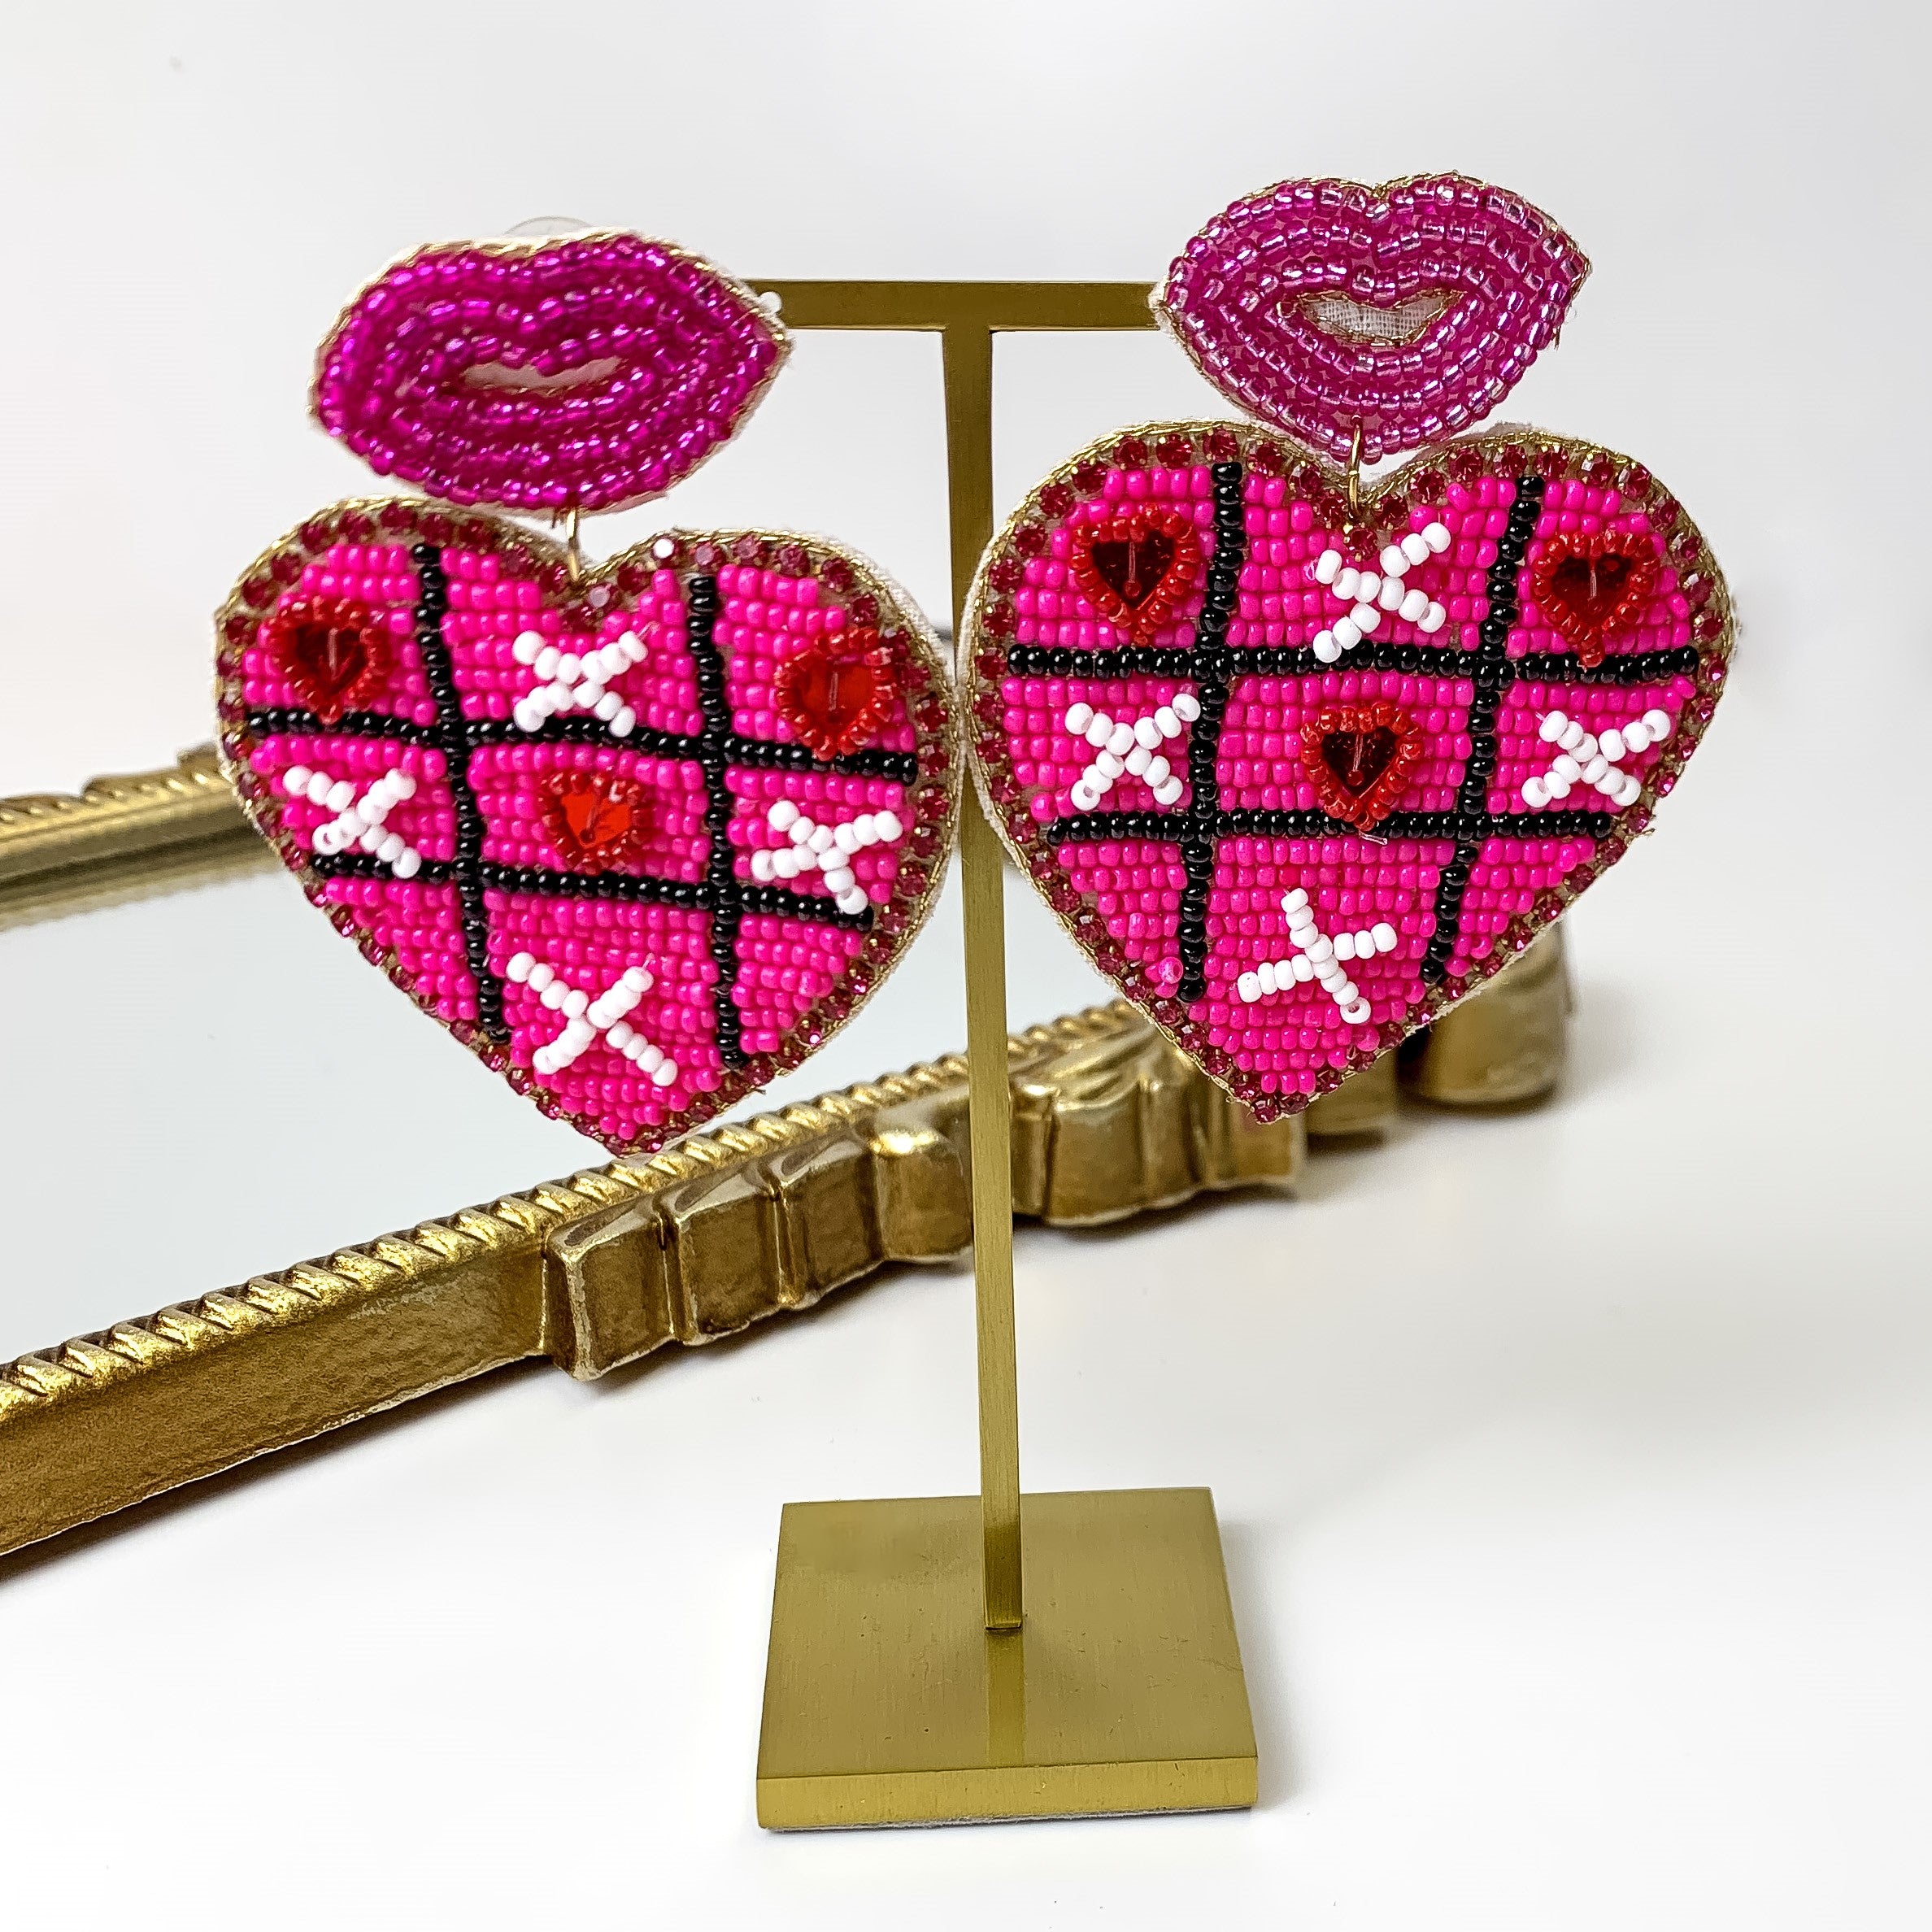 Beaded Heart Shaped Tic Tac Toe Earrings in Fuchsia Pink - Giddy Up Glamour Boutique